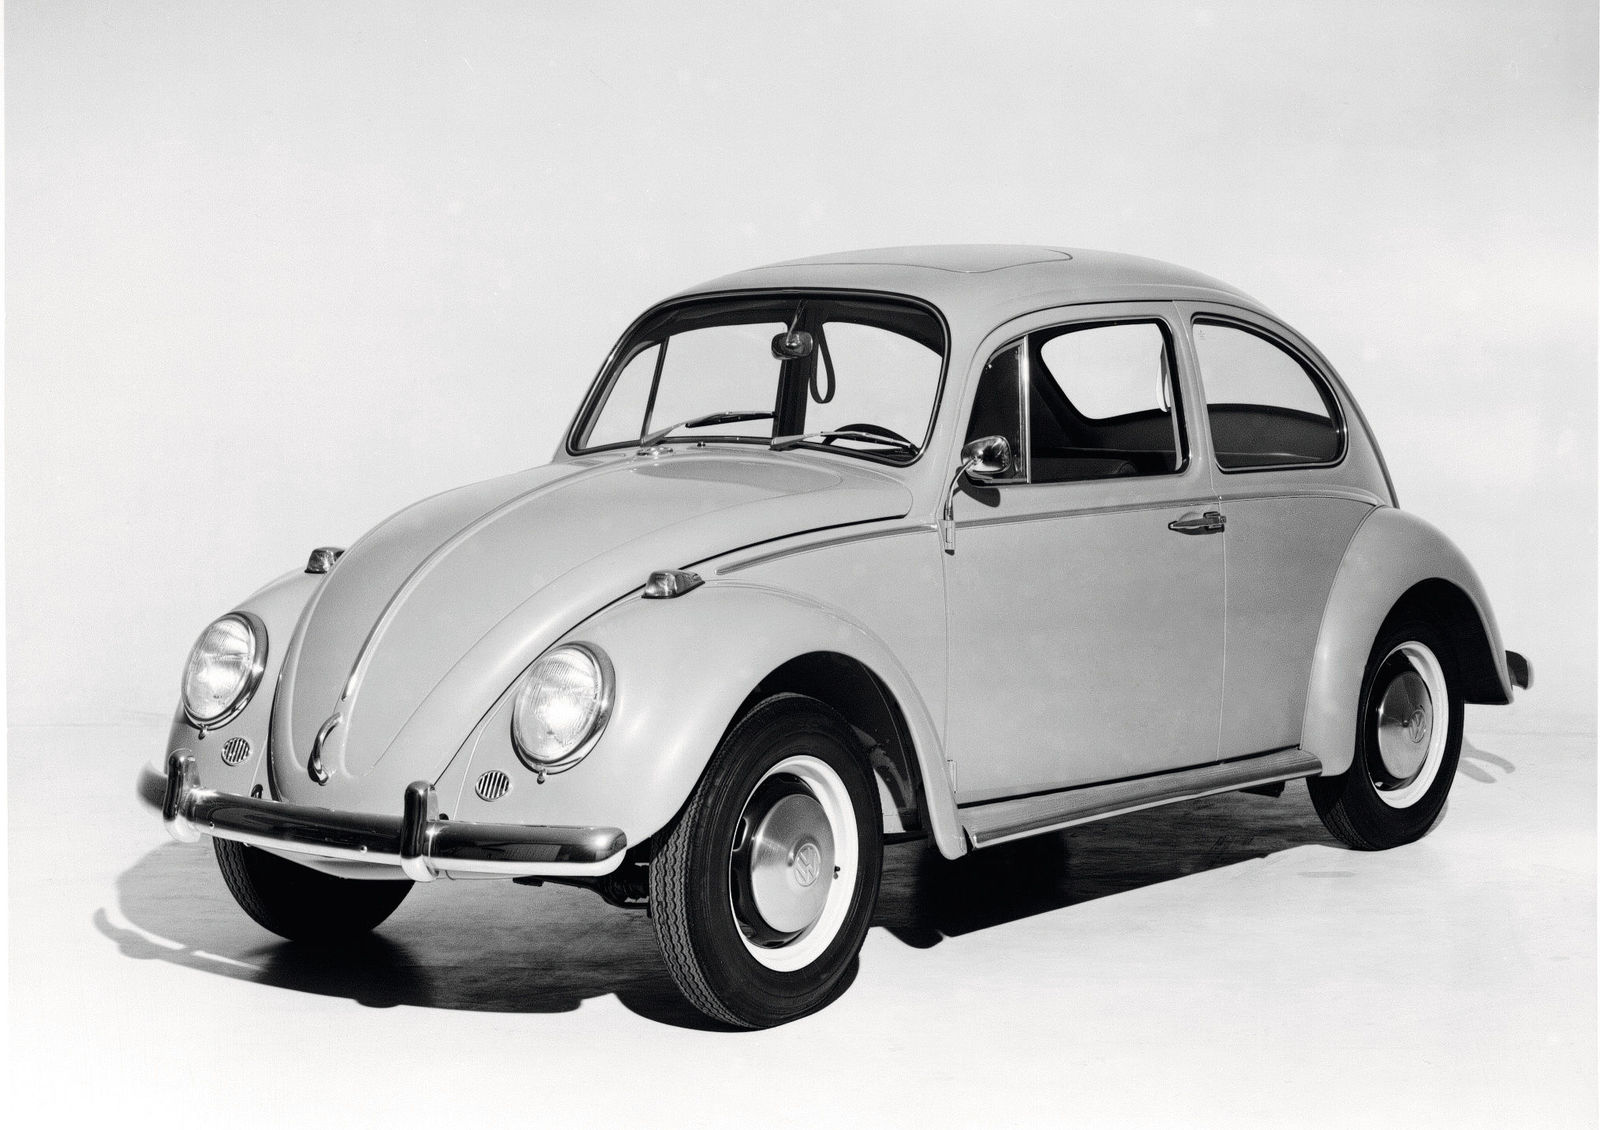 The Volkswagen Beetle – A Success Story